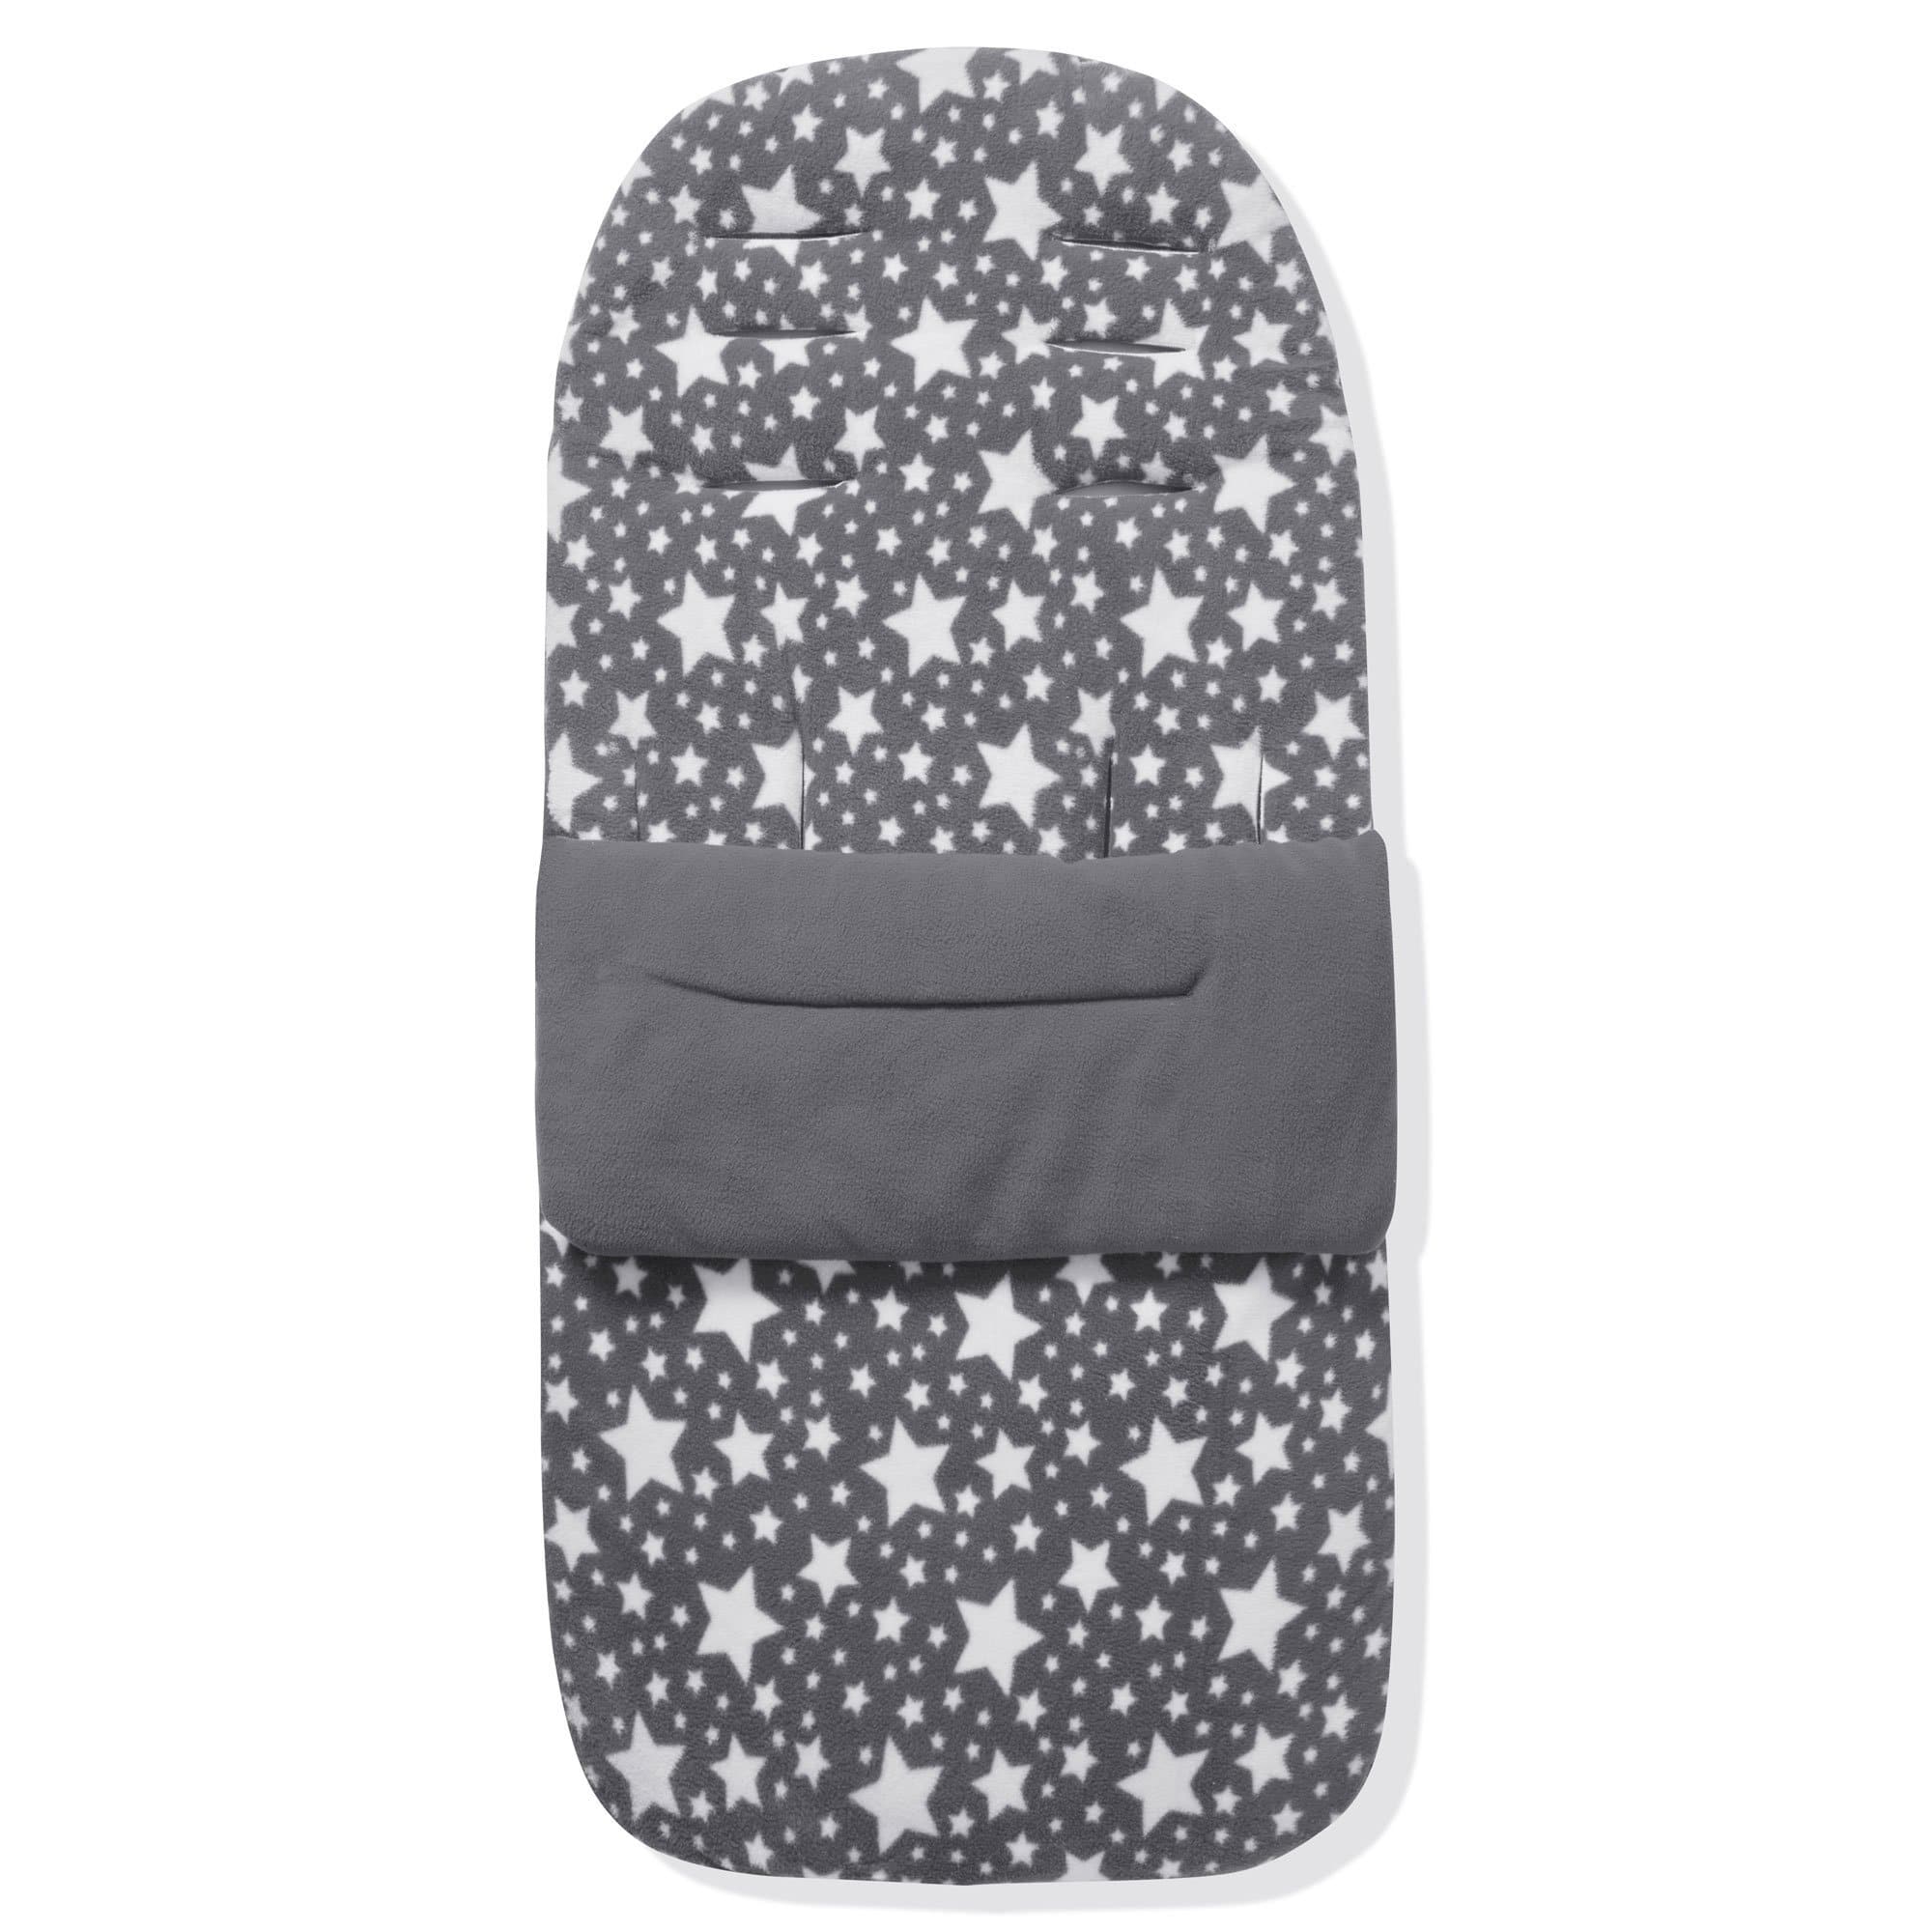 Fleece Footmuff / Cosy Toes Compatible with Quinny - Grey Star / Fits All Models | For Your Little One